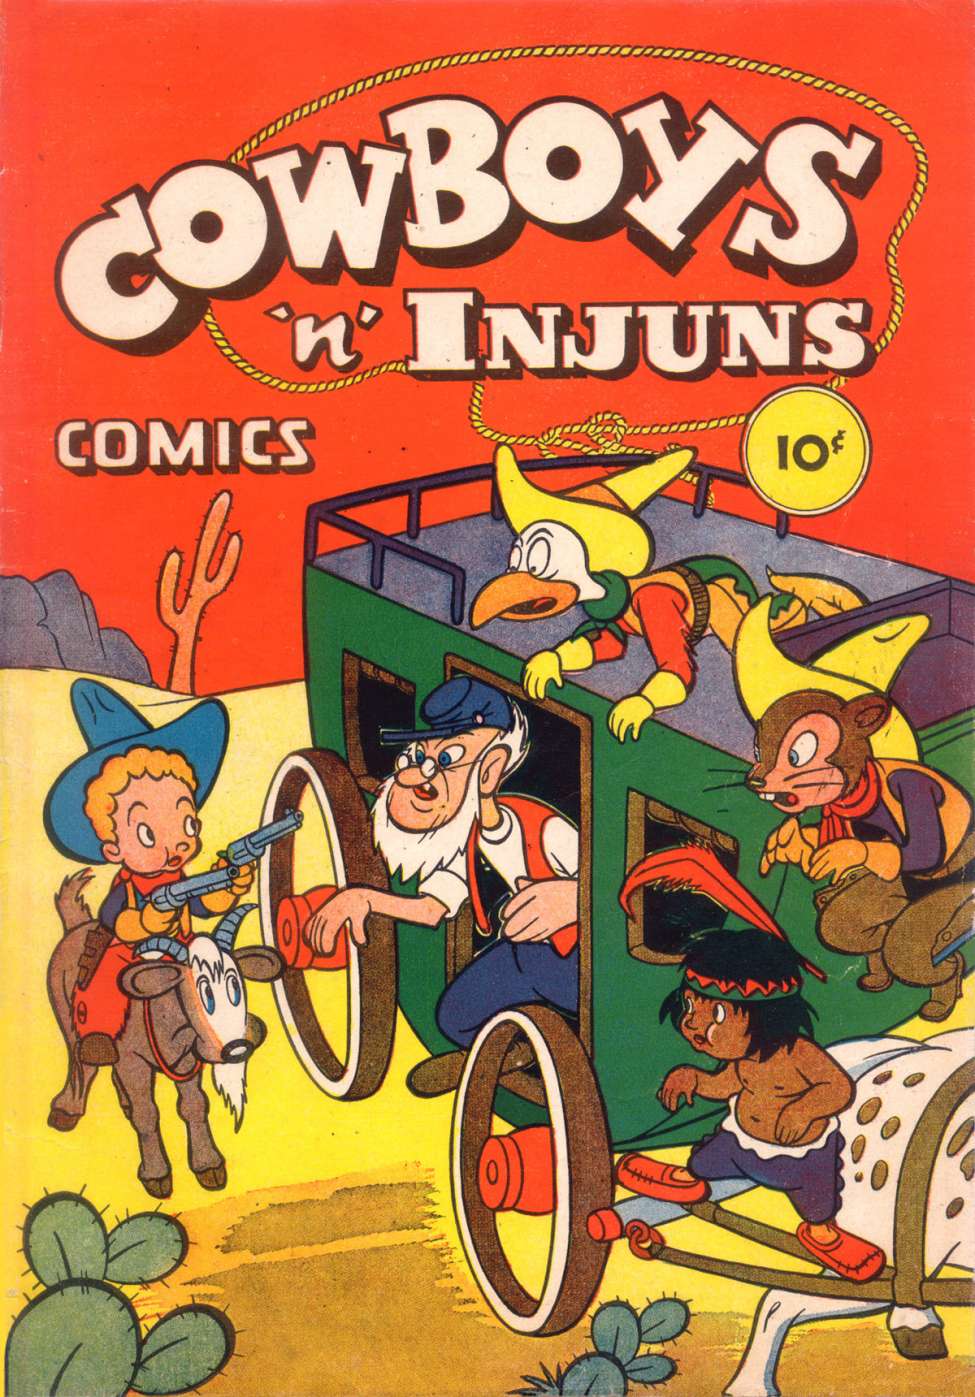 Book Cover For Cowboys 'N' Injuns 1